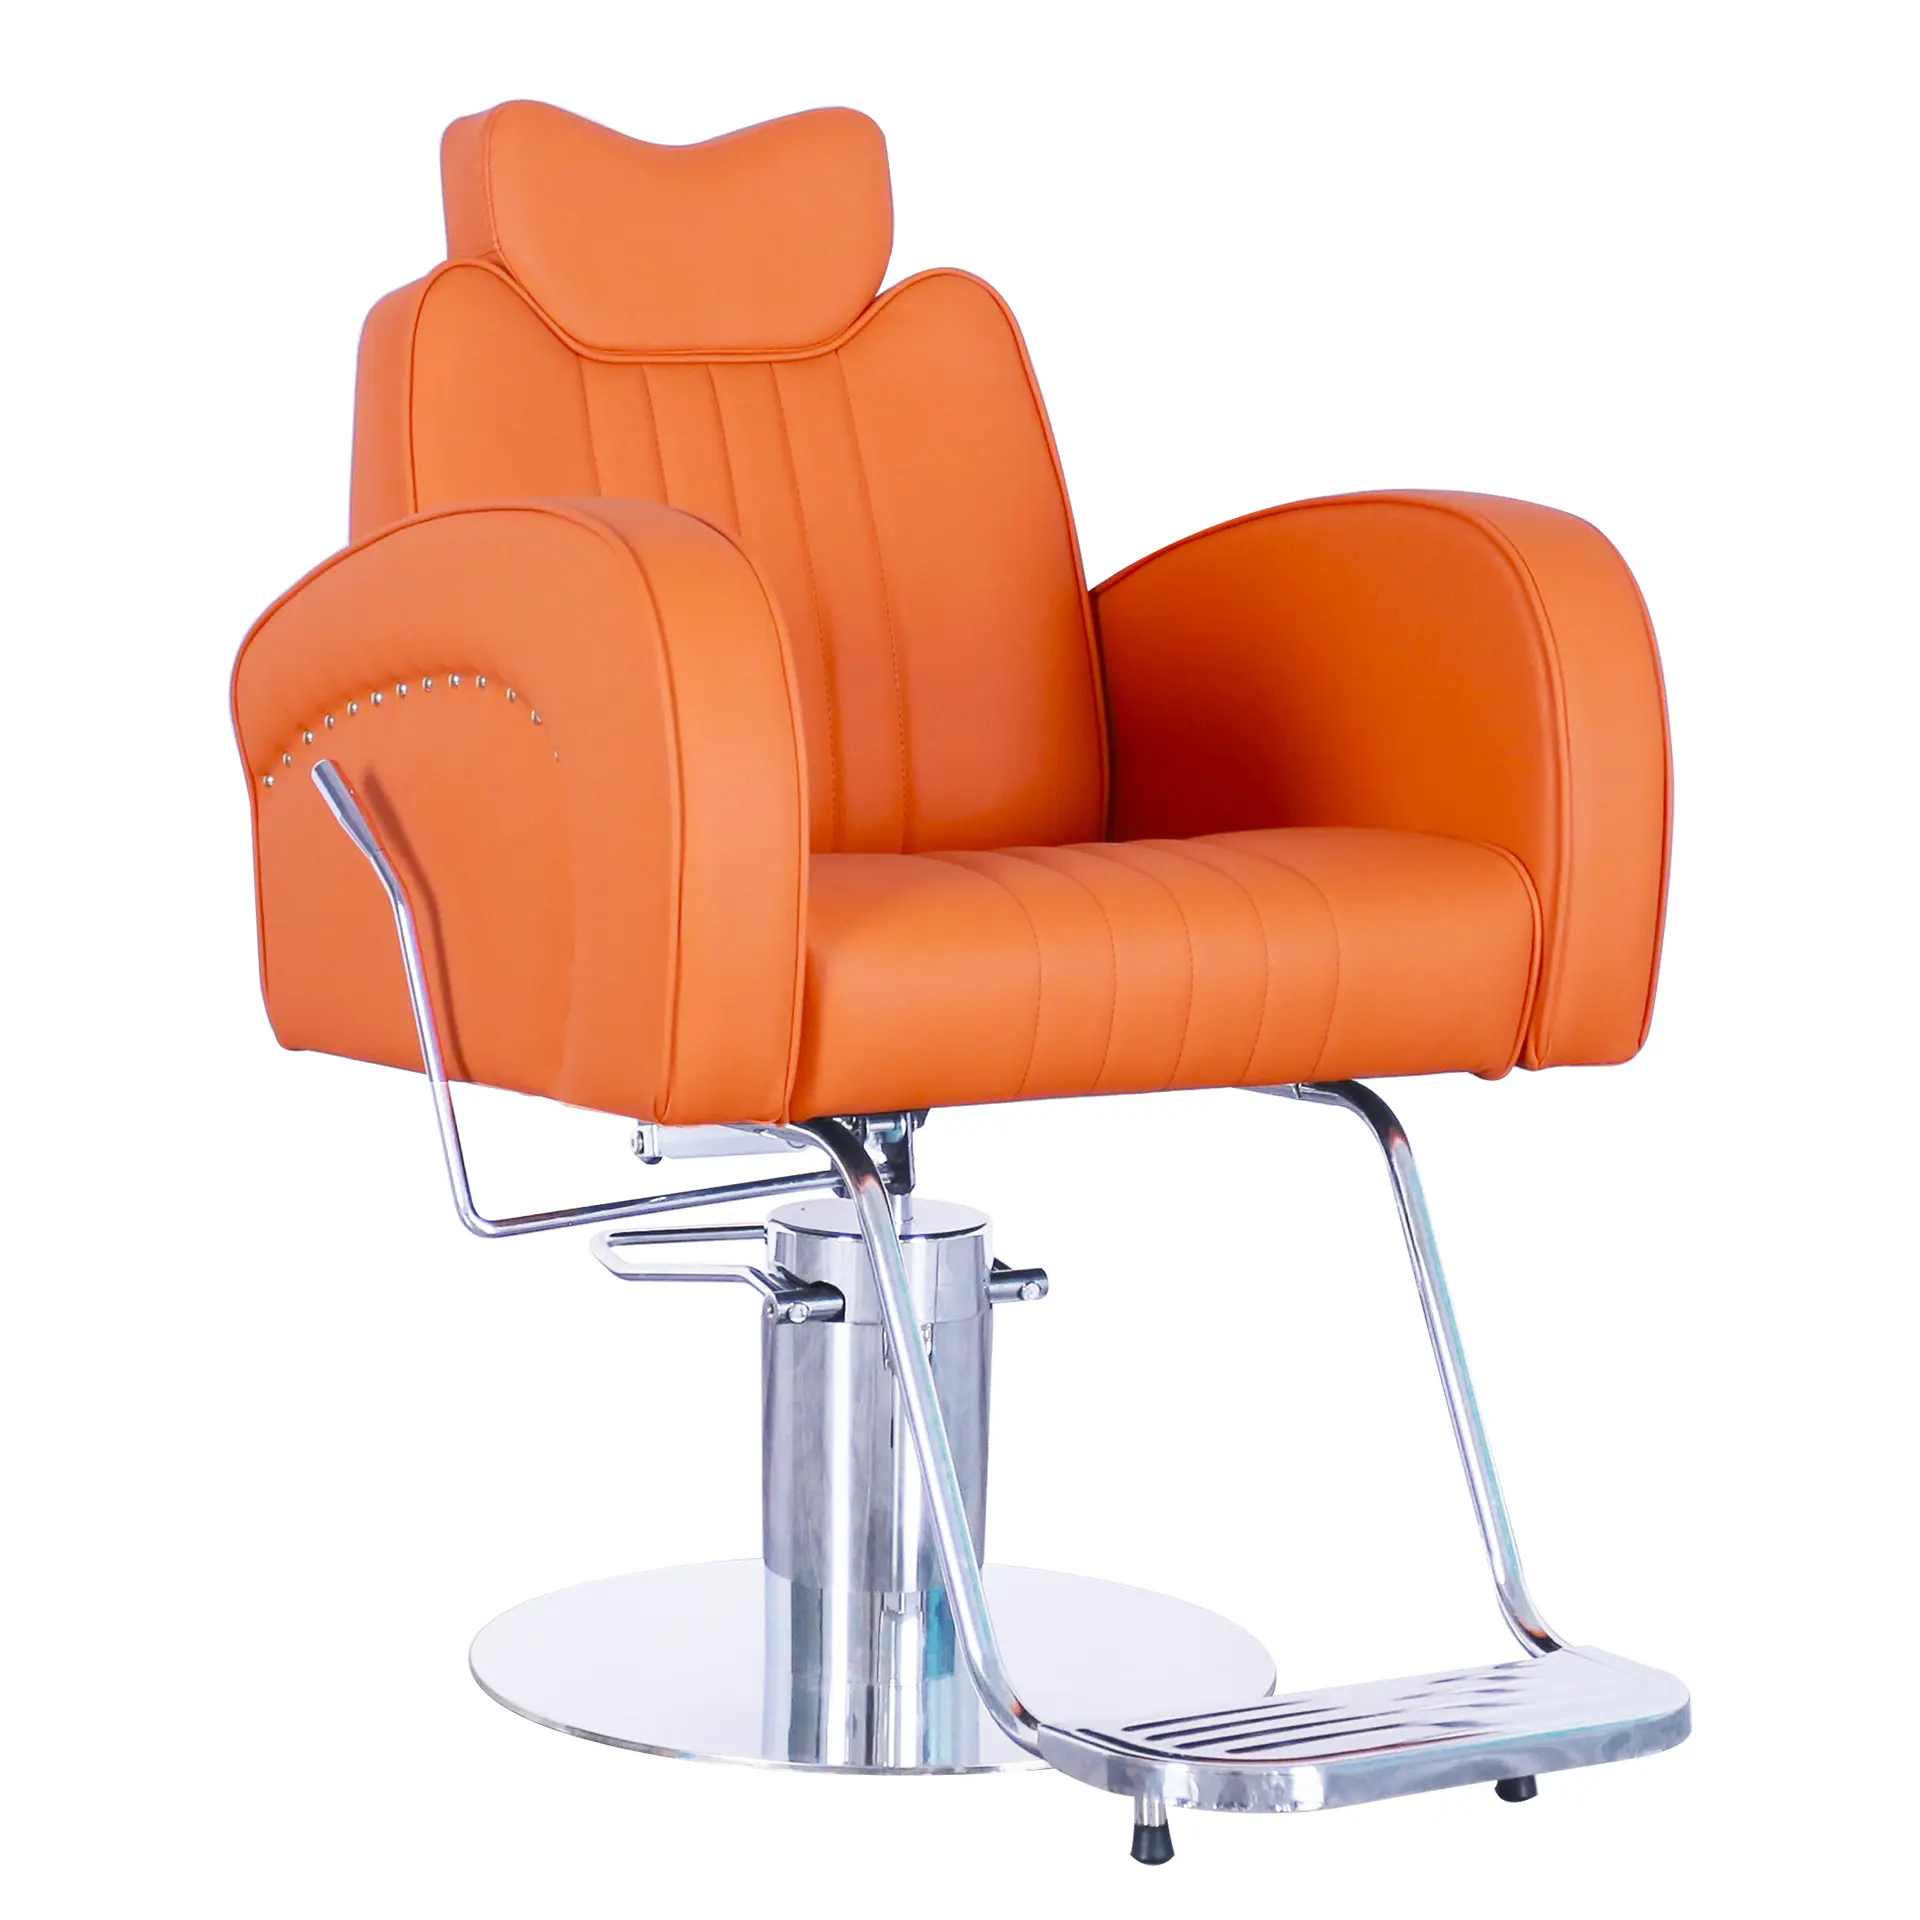 Barbar Synthetic Leather Barber Chairs Stylish and Durable Salon Chair